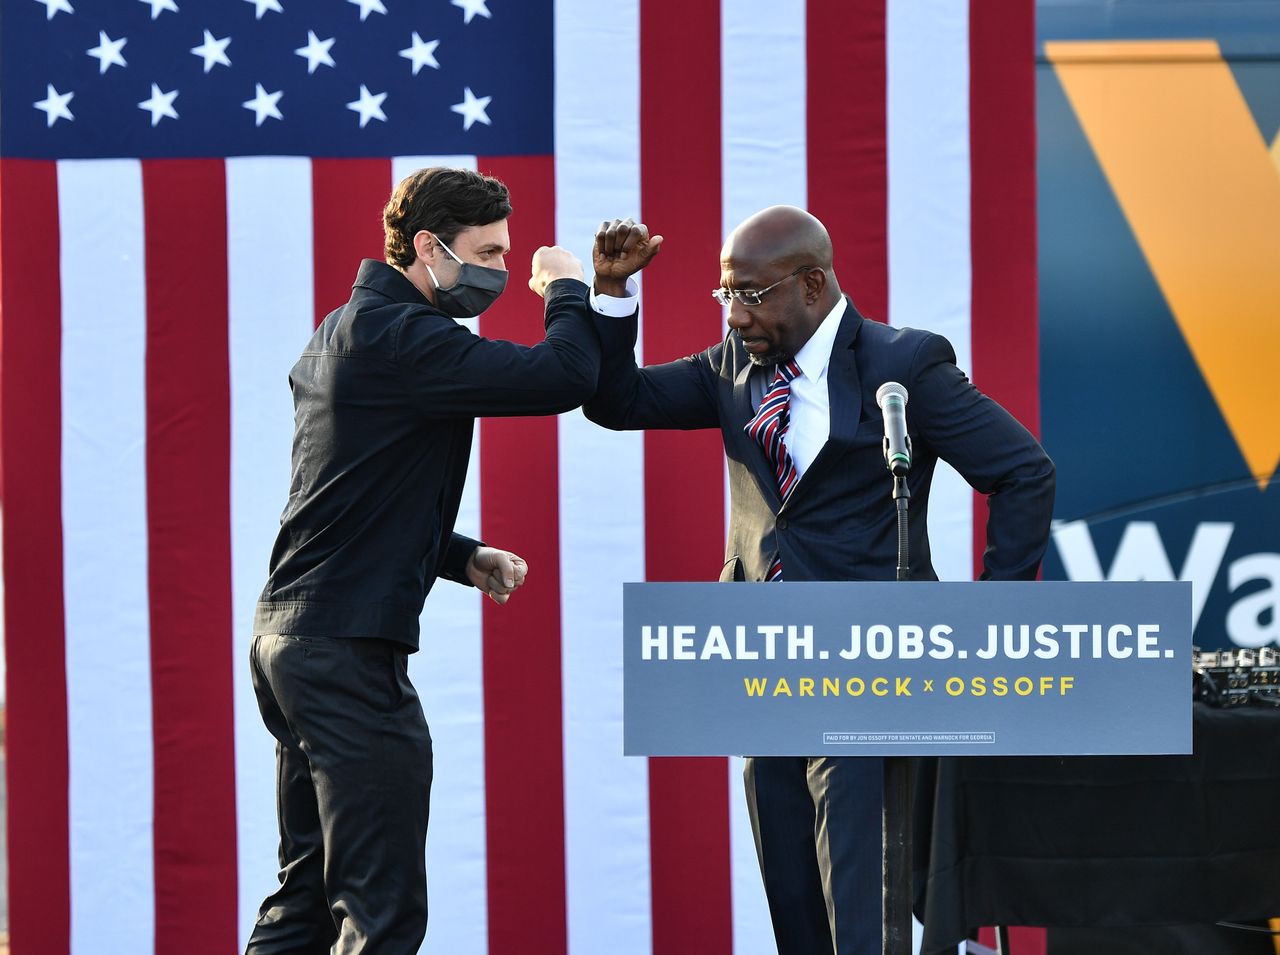 Unexpected victories for Sens. Jon Ossoff (left) and Raphael Warnock in Georgia's run-off elections gave Democrats a narrow Senate majority — and a plausible path forward on voting rights legislation party leaders had spent years crafting.